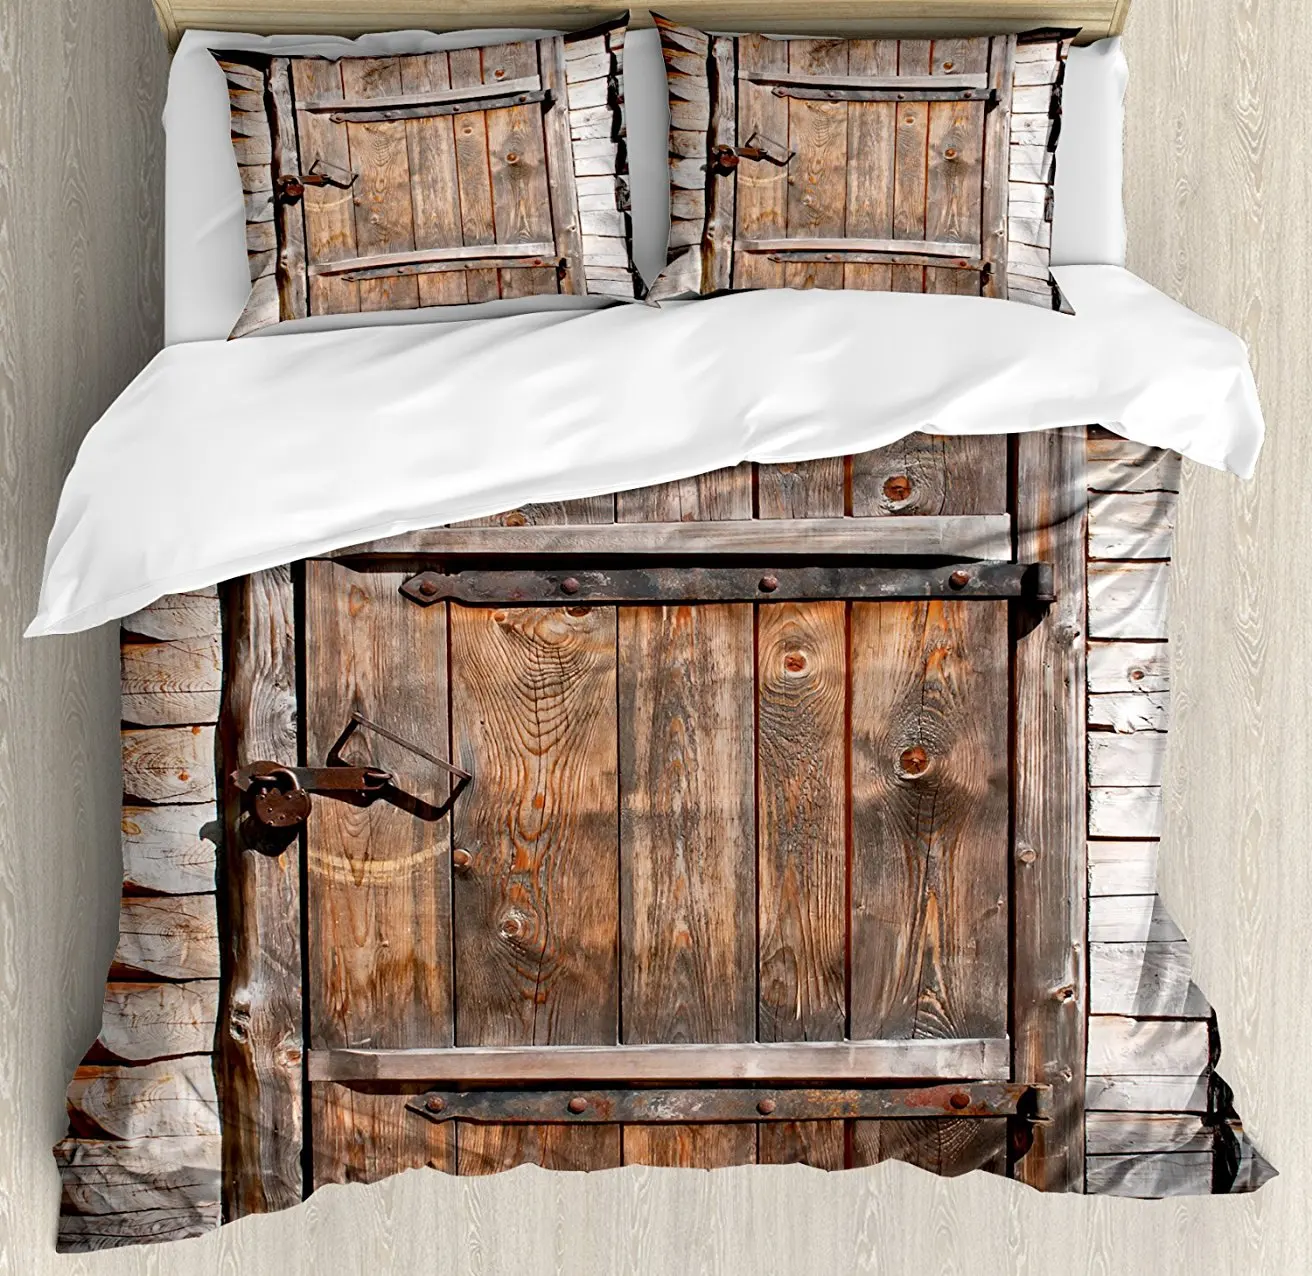 Duvet Cover Set, Rustic Wooden Door of Old Barn in Farmhouse Countryside Village Aged Rural Life